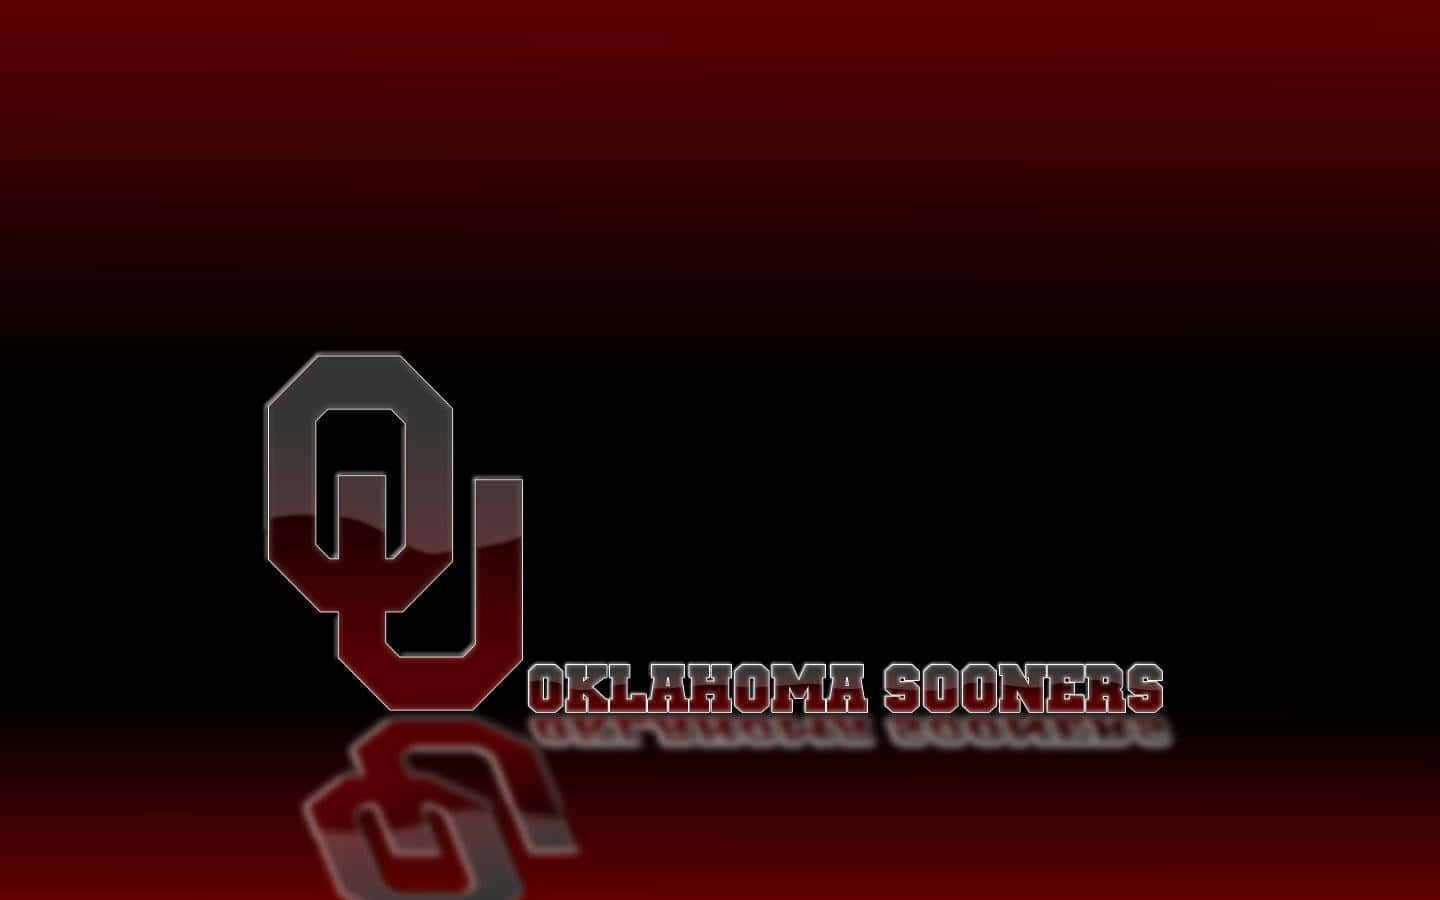 “The Oklahoma Sooners - Making Waves in Athletics!” Wallpaper